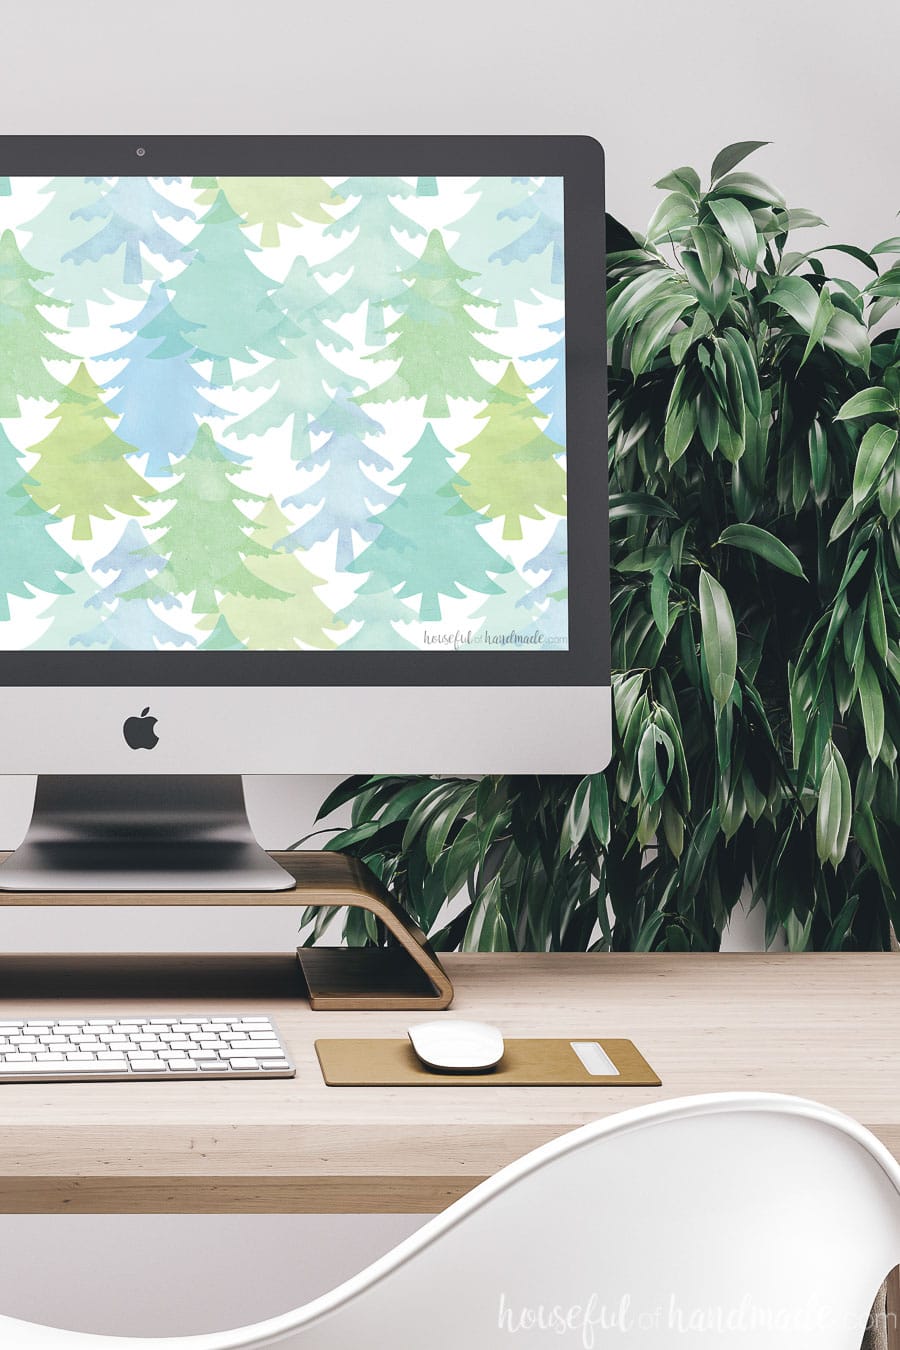 Watercolor evergreen trees in tones of greens and blues in an allover pattern as the December digital wallpaper on a computer screen. 